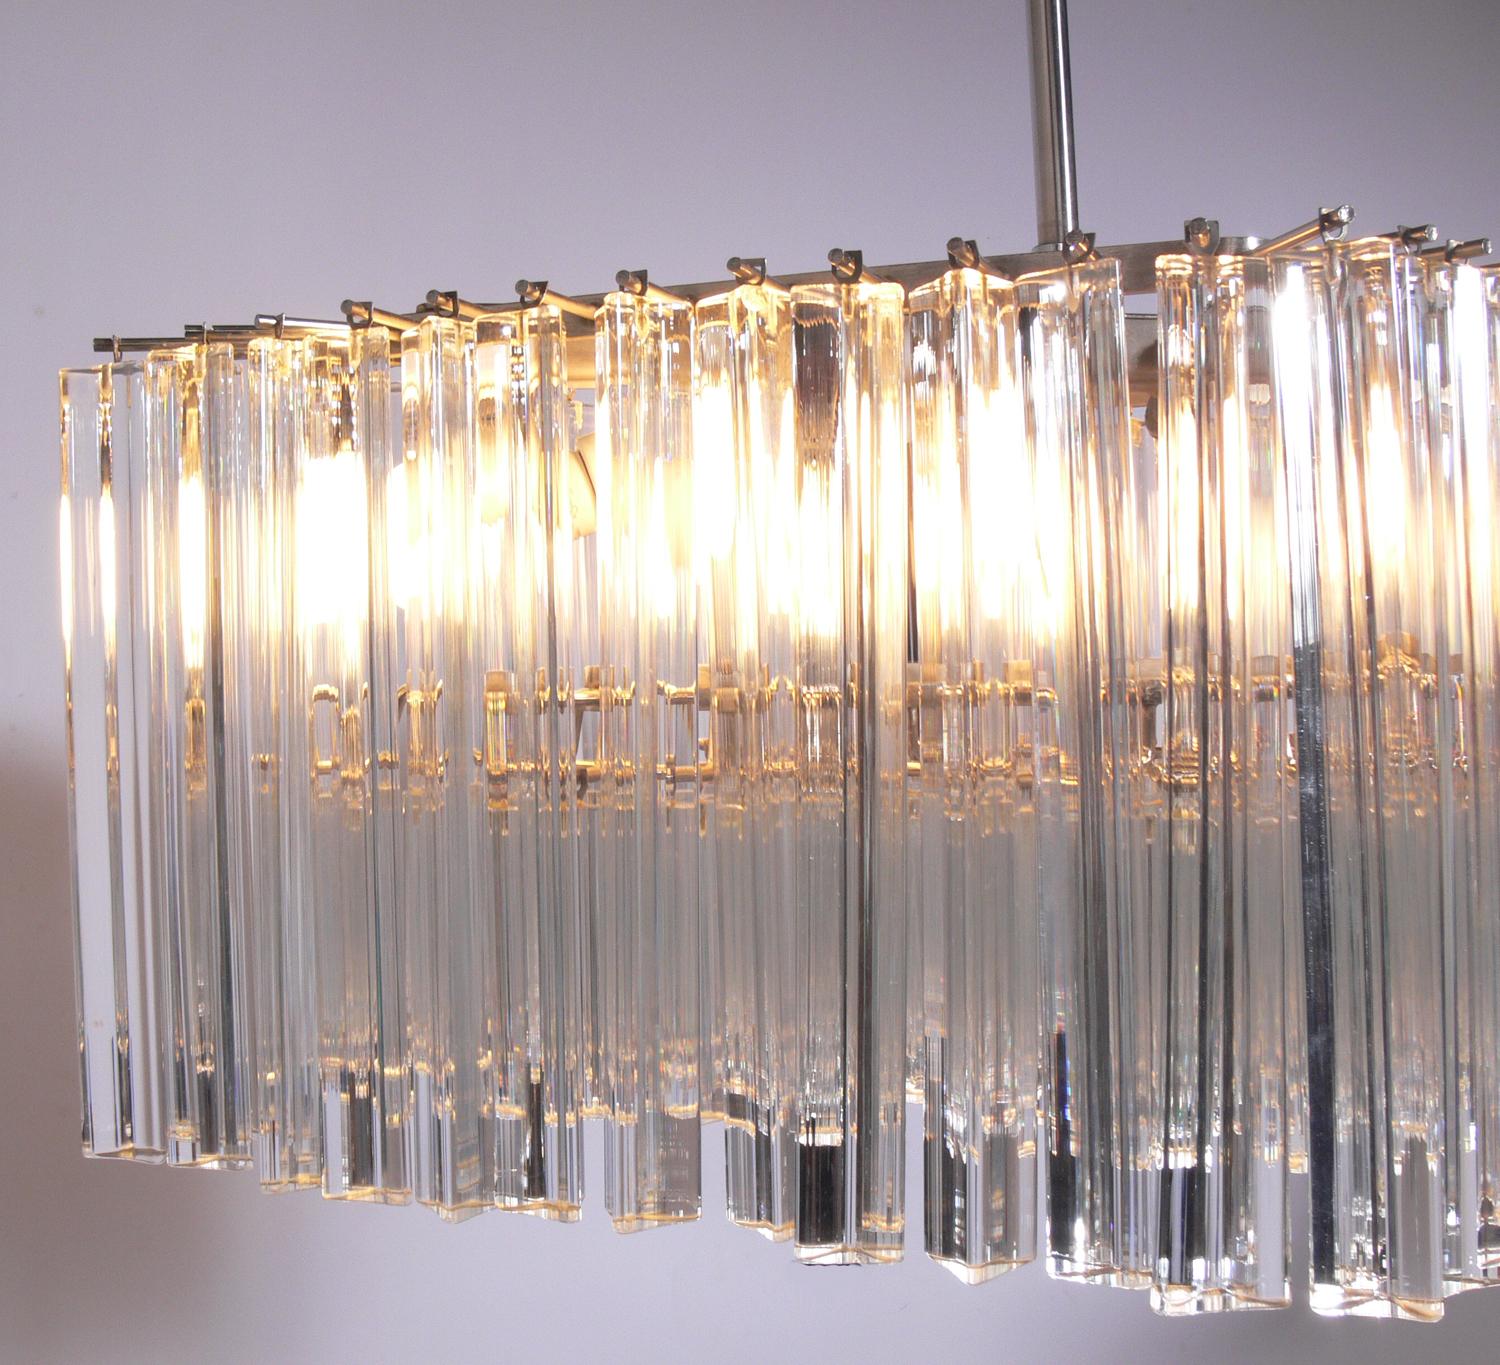 Italian crystal prisms chandelier by Camer, Italy, circa 1960s. Looks incredible when lit. Constructed of a nickel-plated metal armature and crystal prisms.